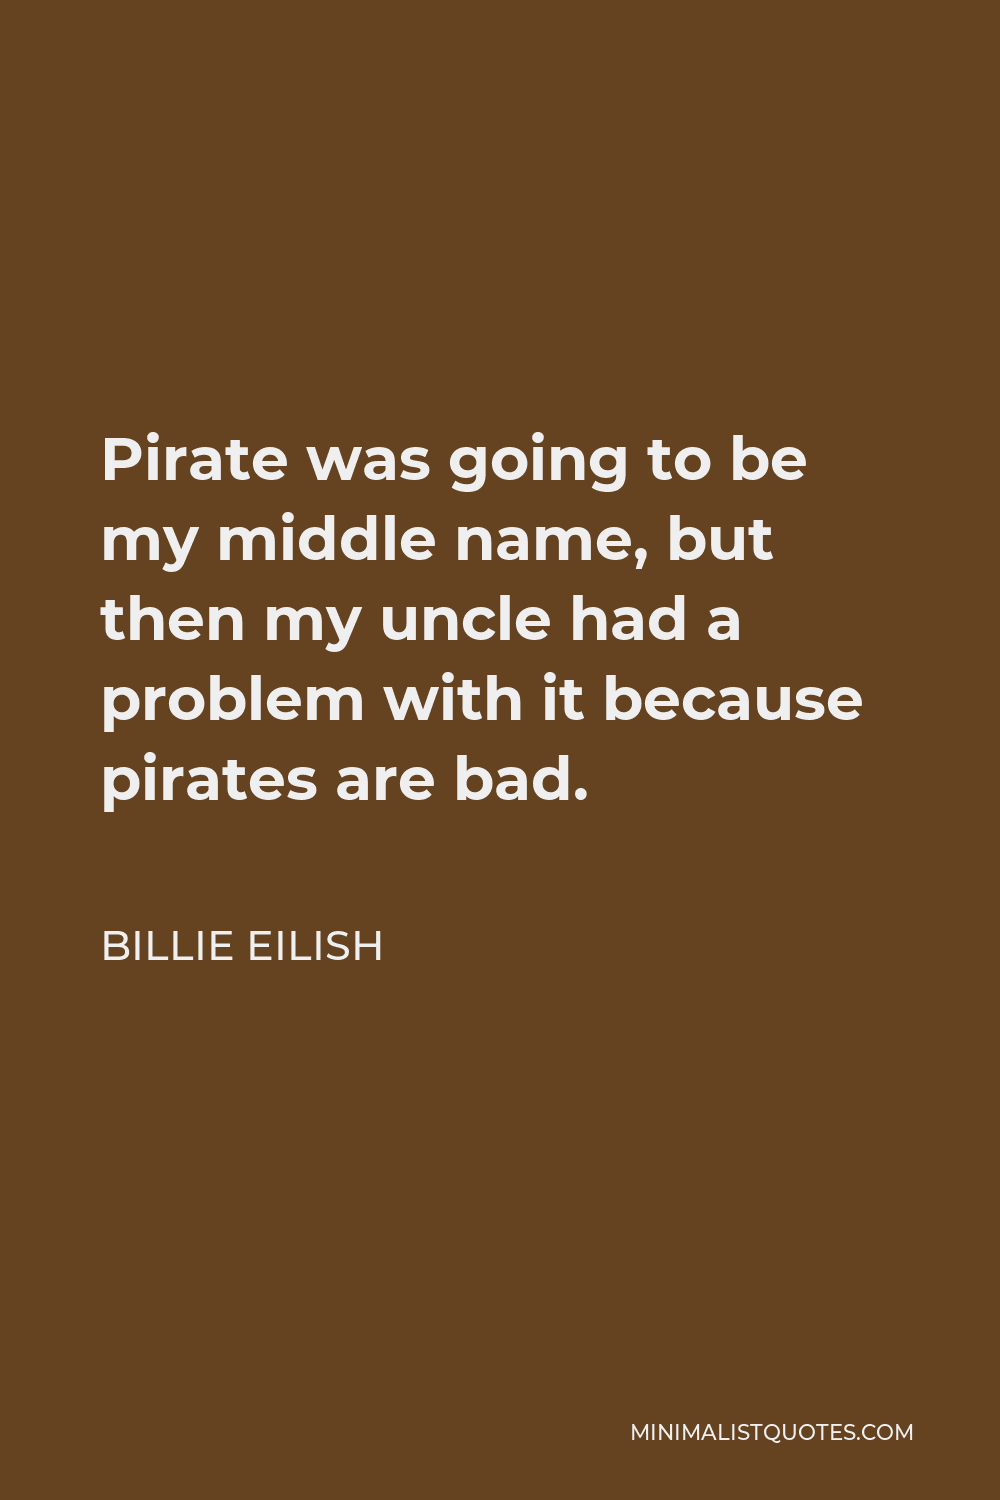 Billie Eilish Quote - Pirate was going to be my middle name, but then my uncle had a problem with it because pirates are bad.